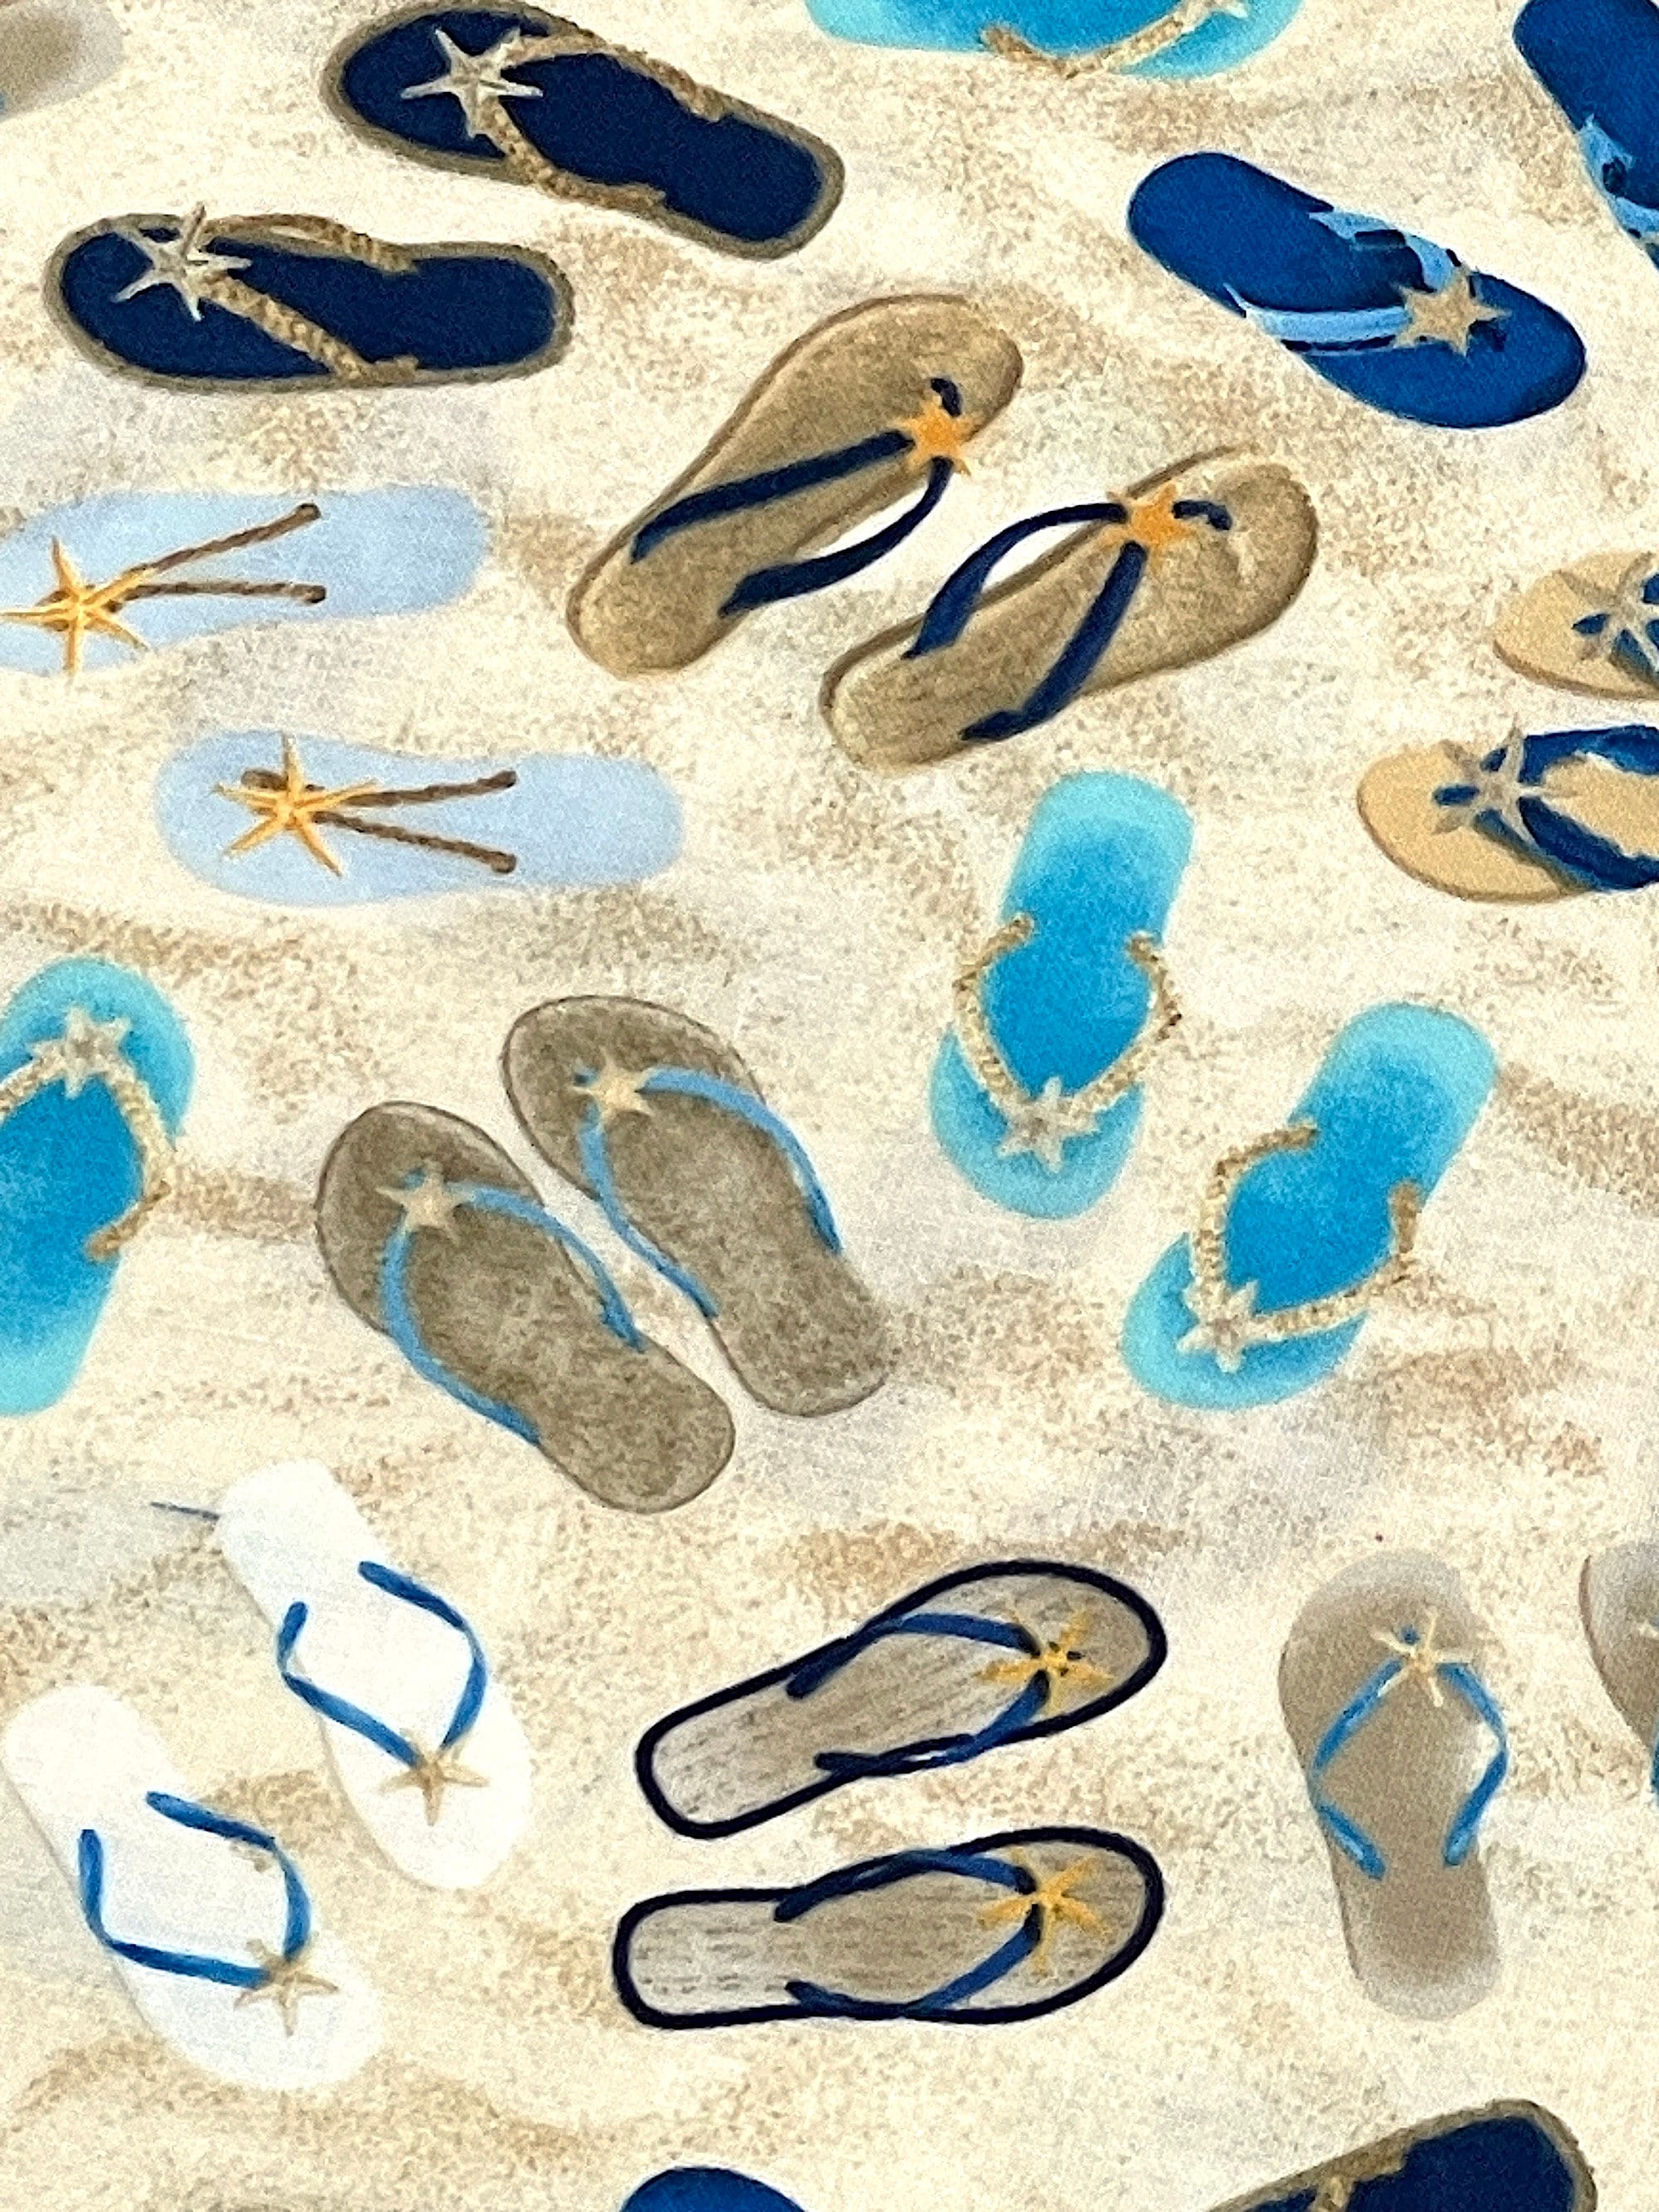 Close up of flip flops on the sand.